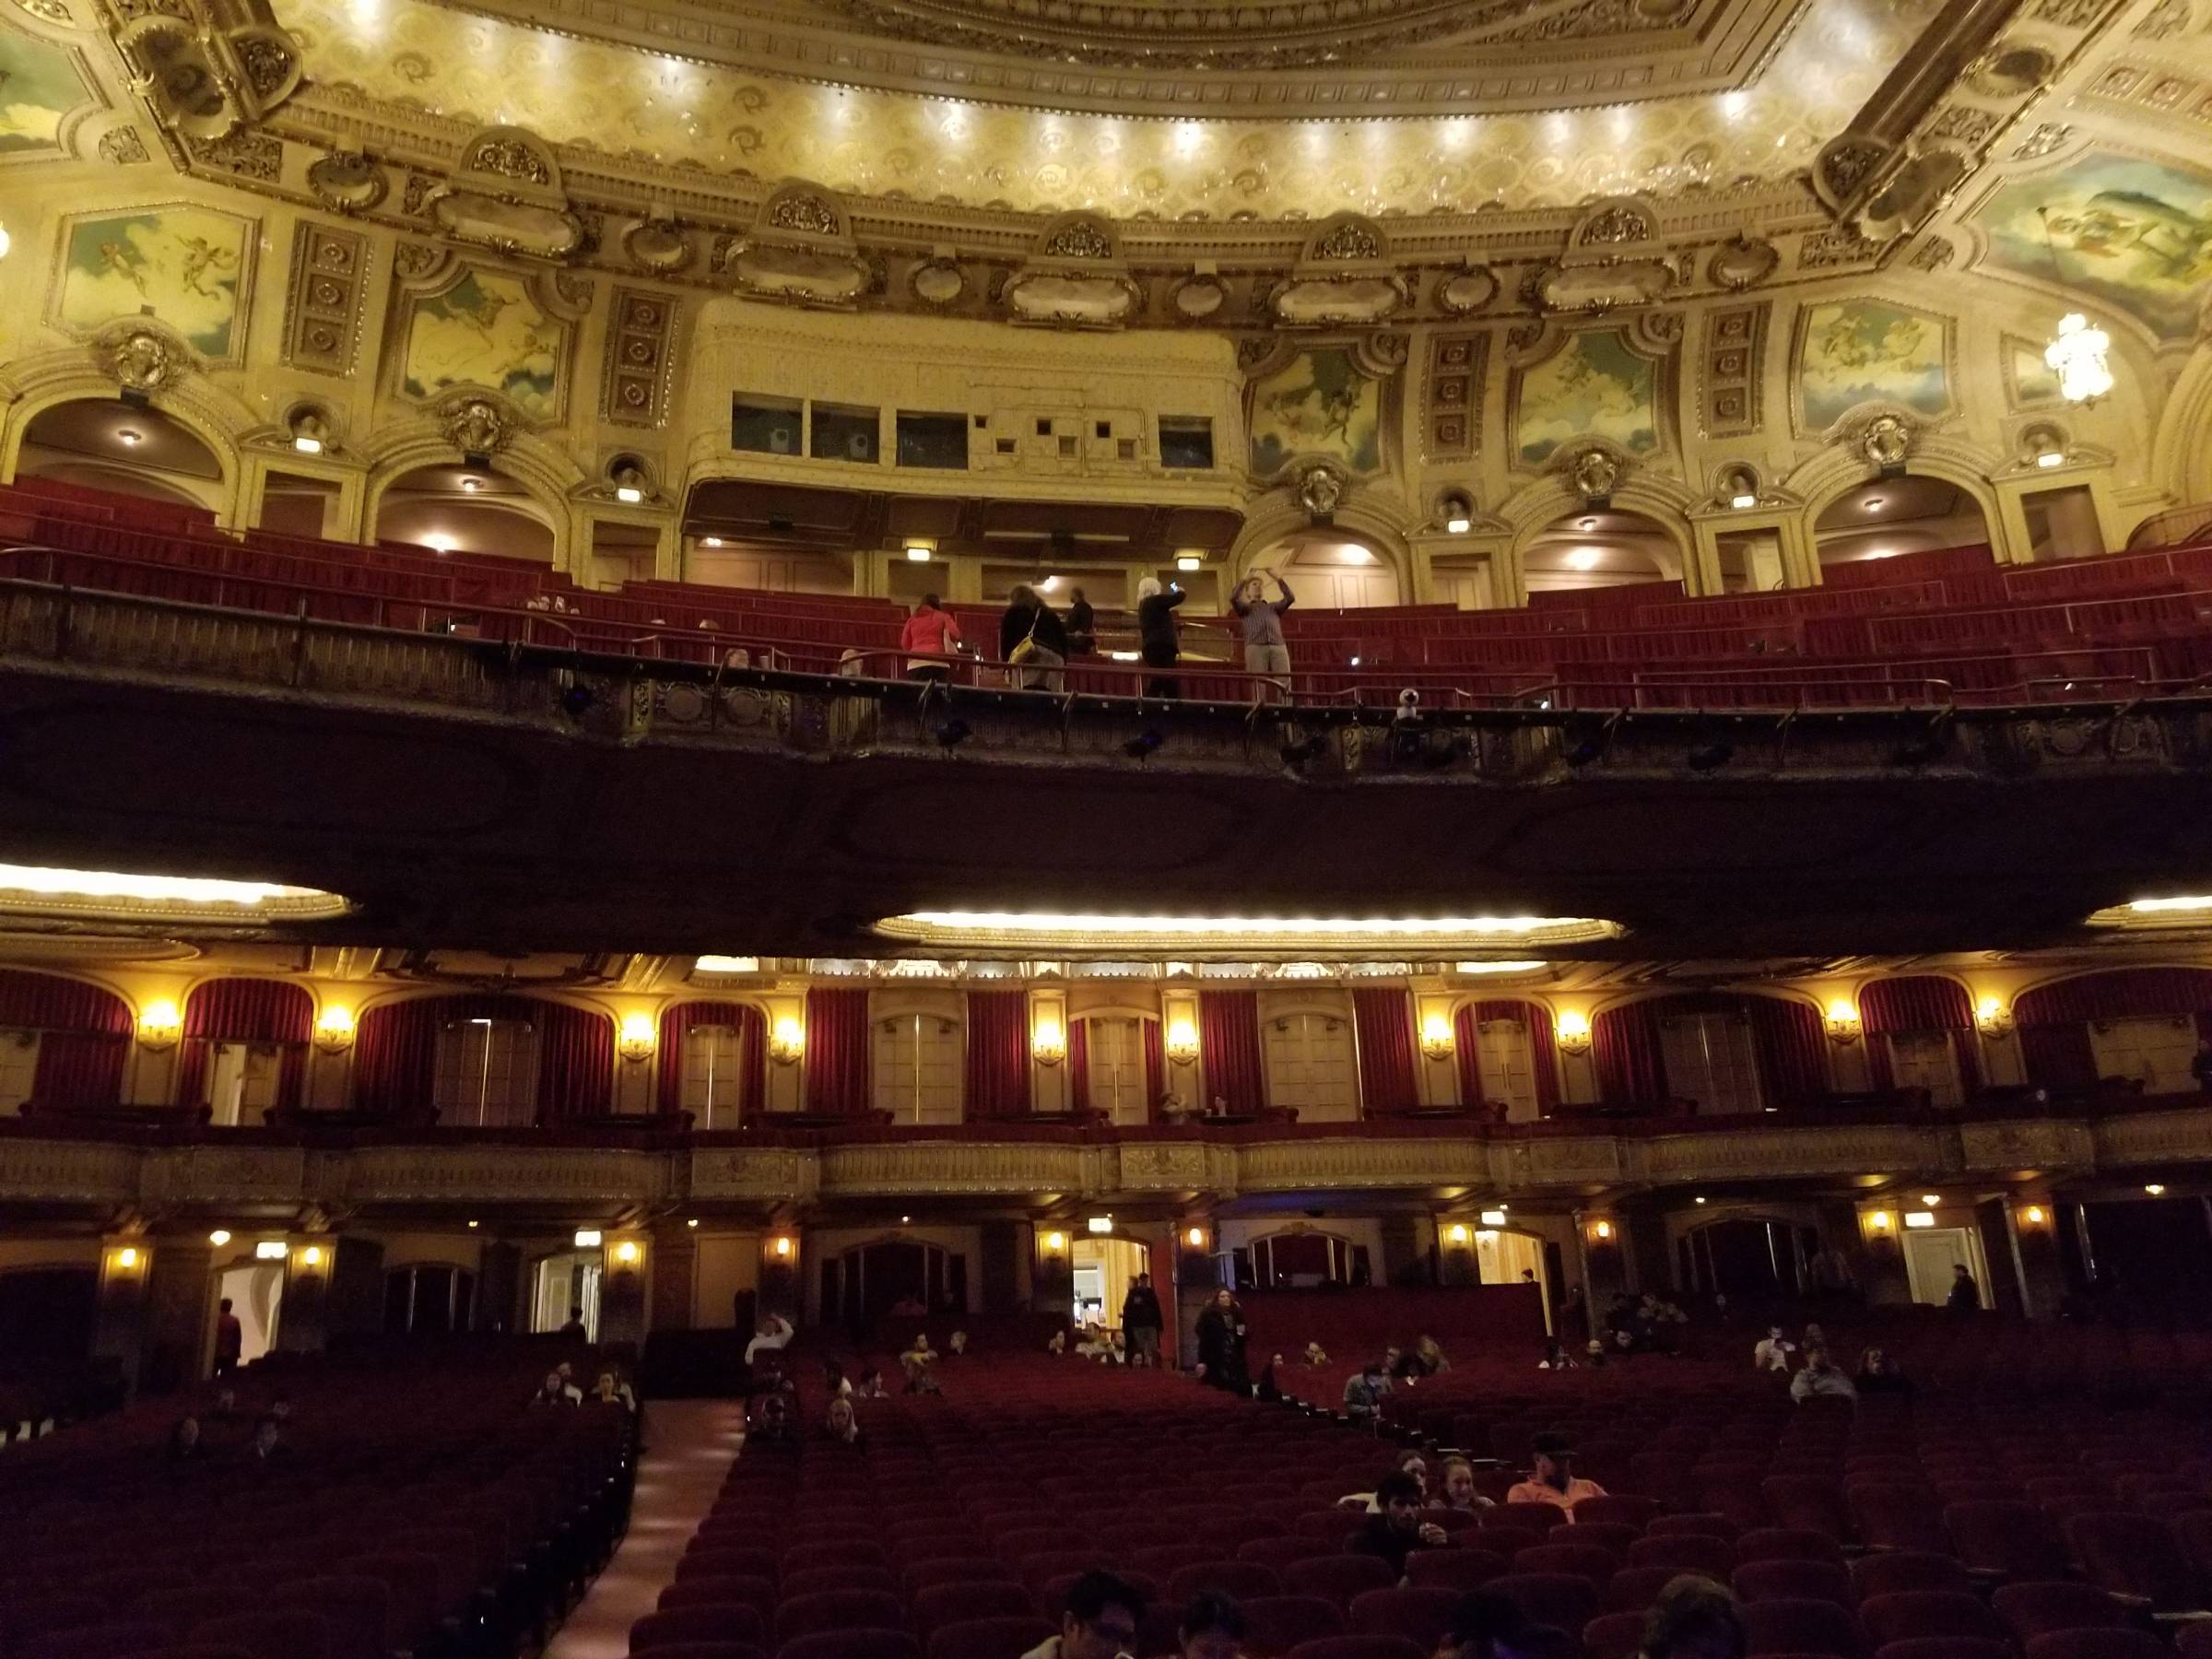 All levels of seating at the Chicago Theatre